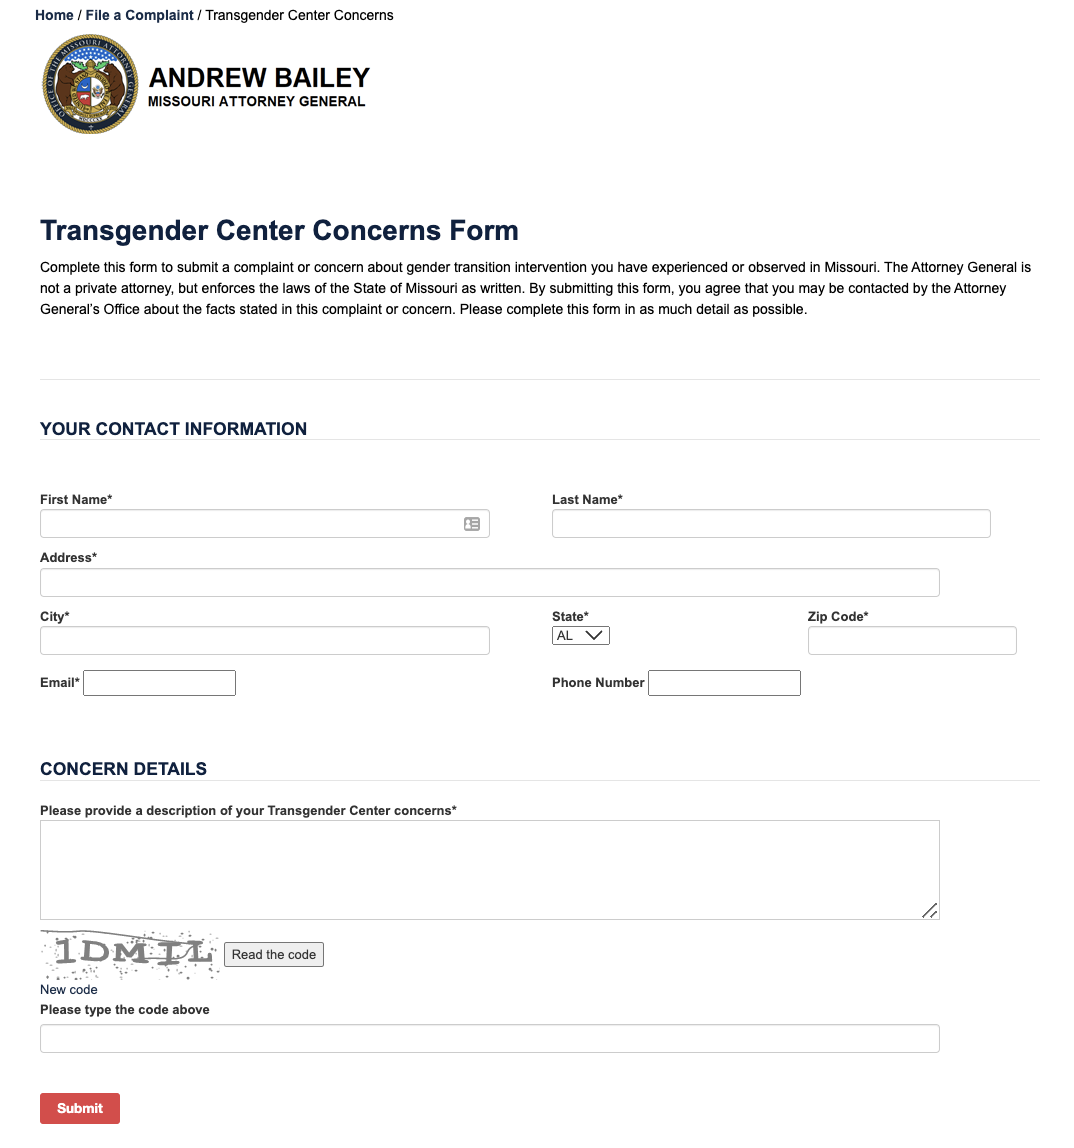 The form asked users to submit complaints and concerns about gender-affirming care.